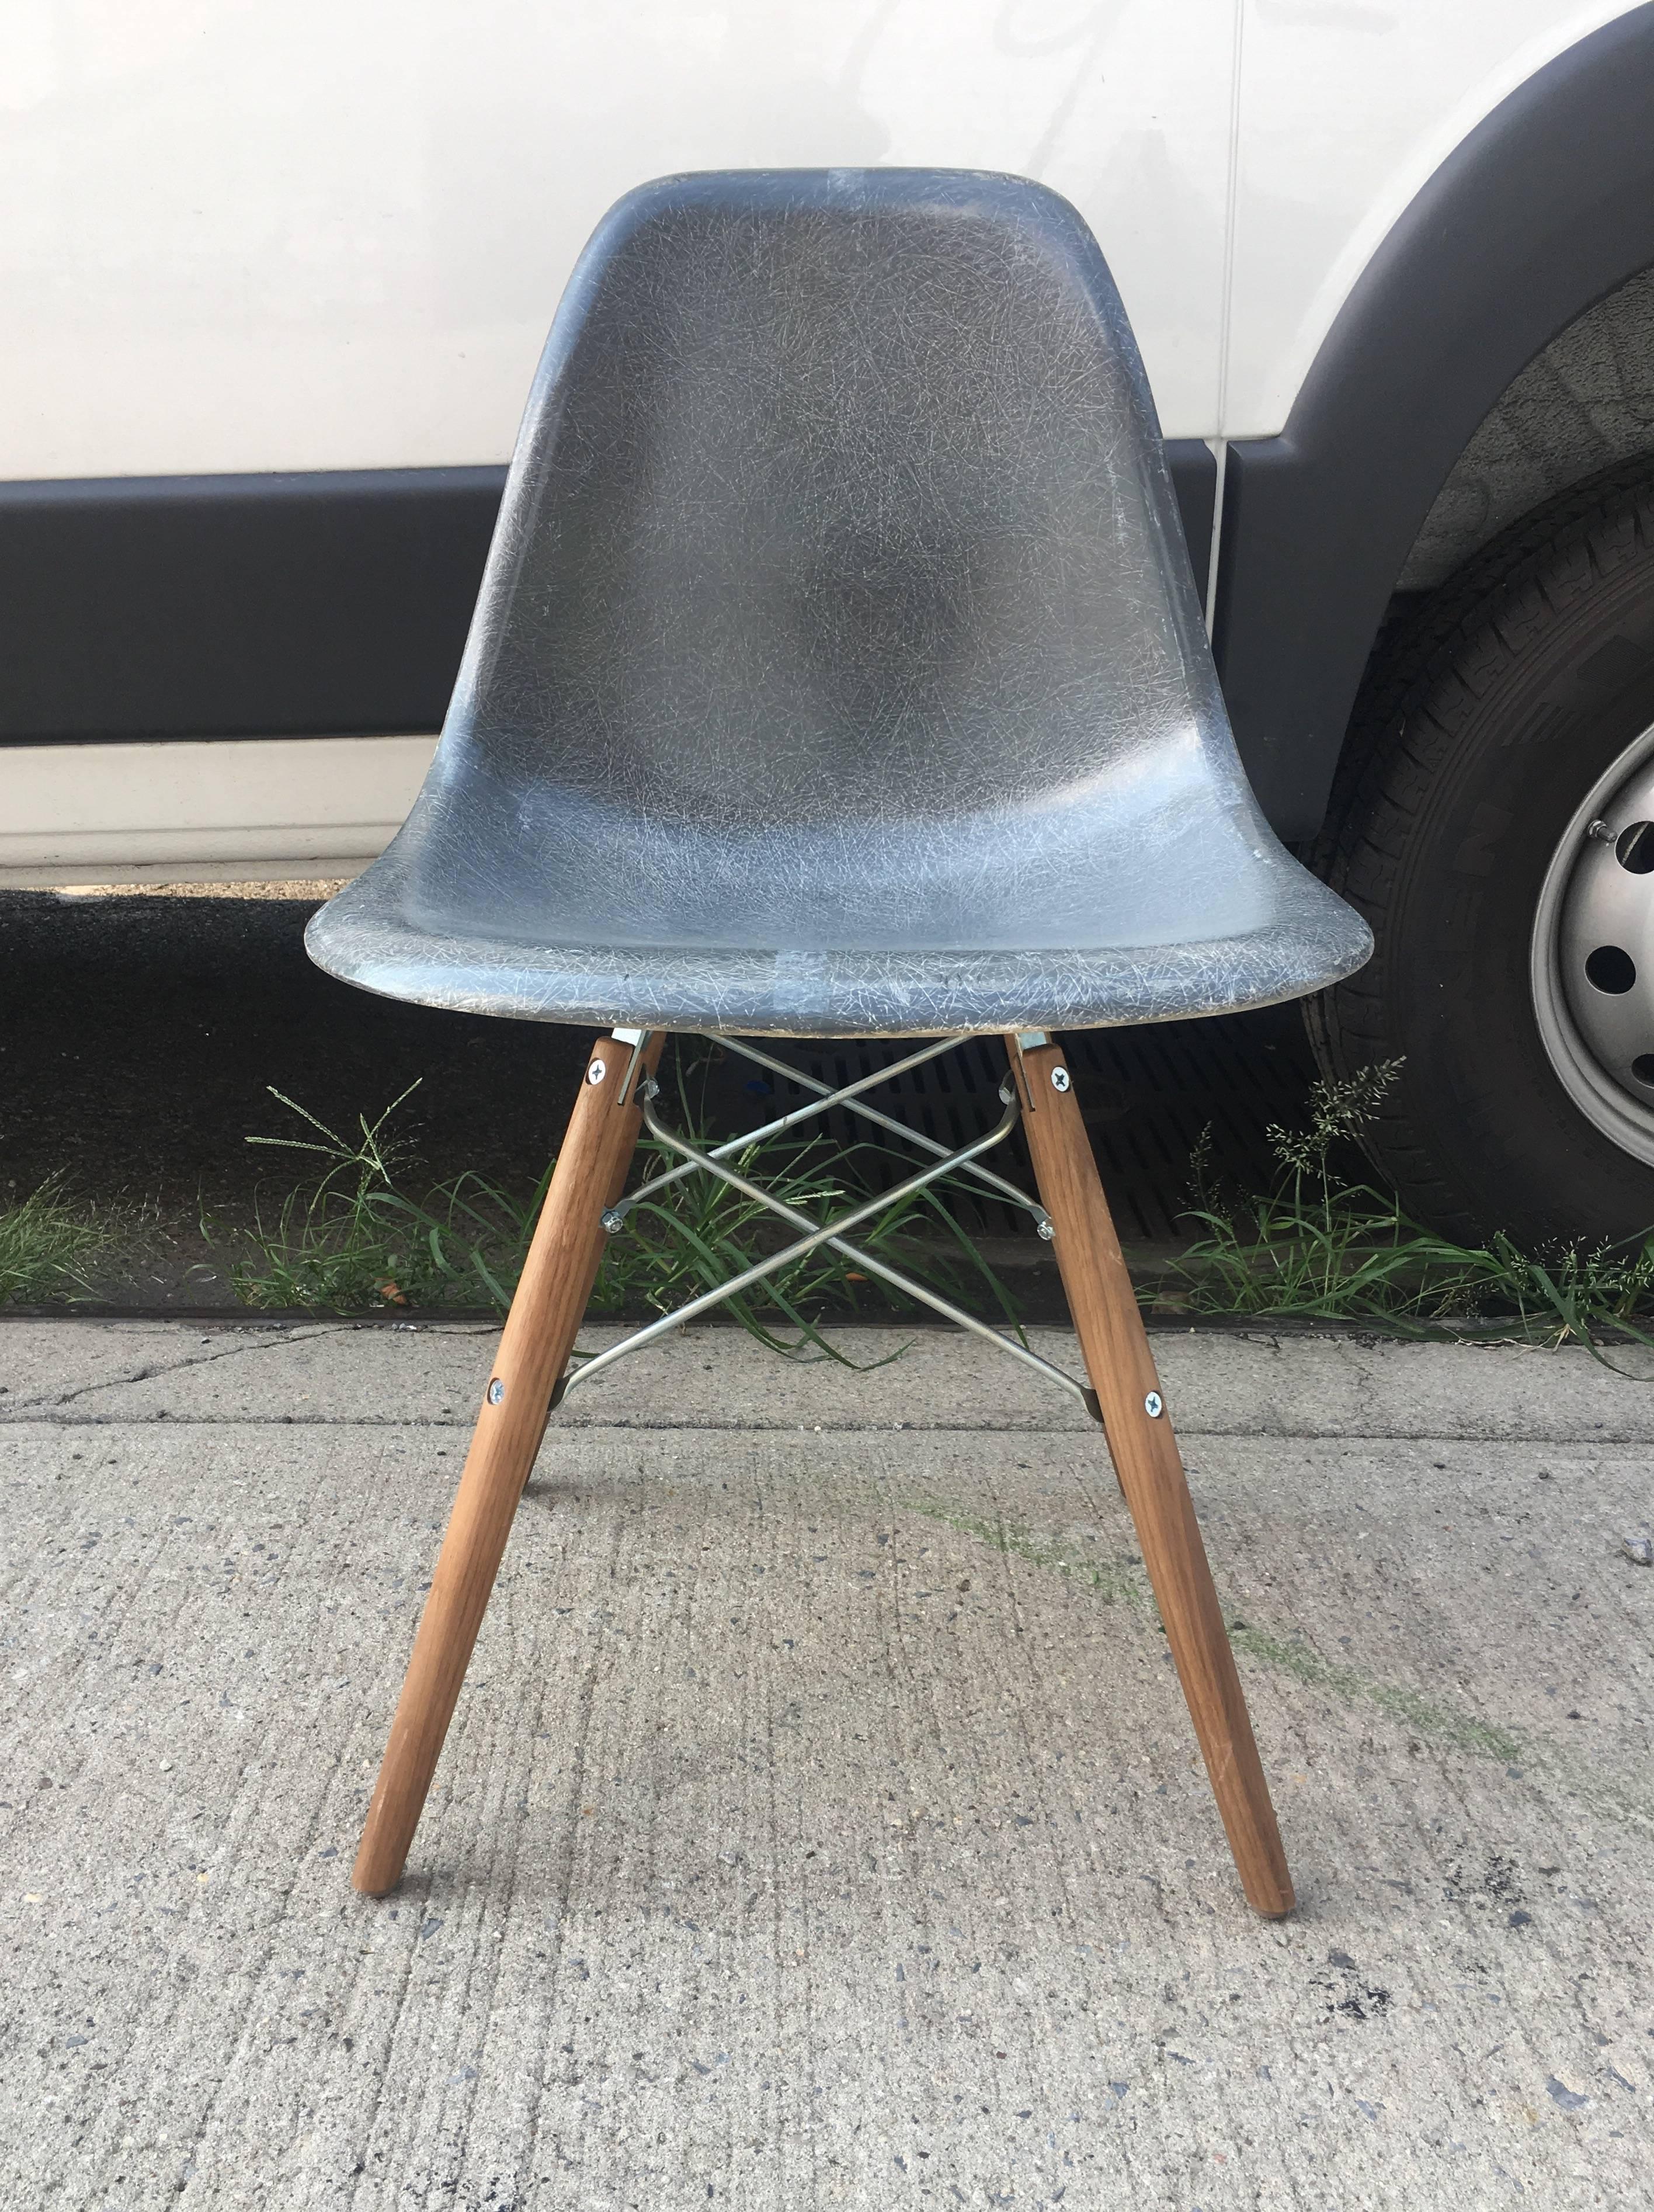 Eight Herman Miller Eames dining chairs in tan and grey. New walnut bases. In excellent condition. Ships disassembled. Individual shells may show nuance in appearance.